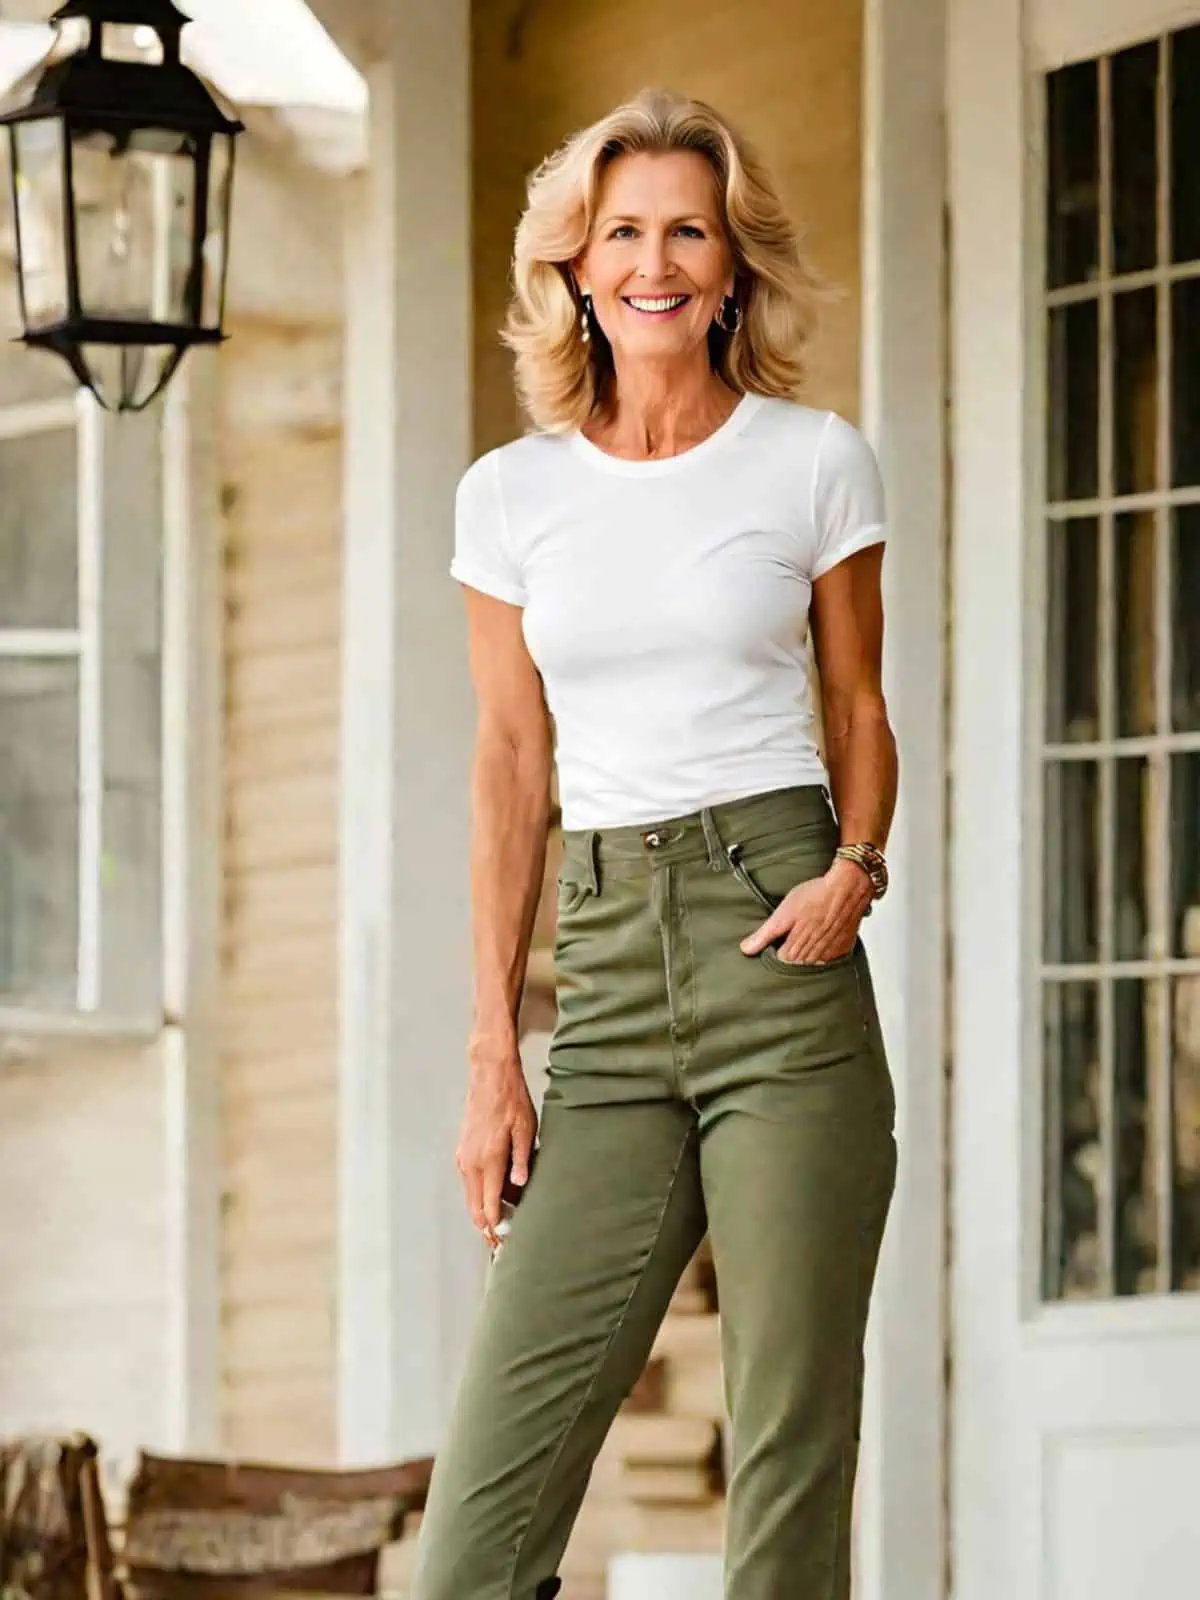 The Ultimate Jeans Guide for Women Over 60: 15 Styles You'll Love